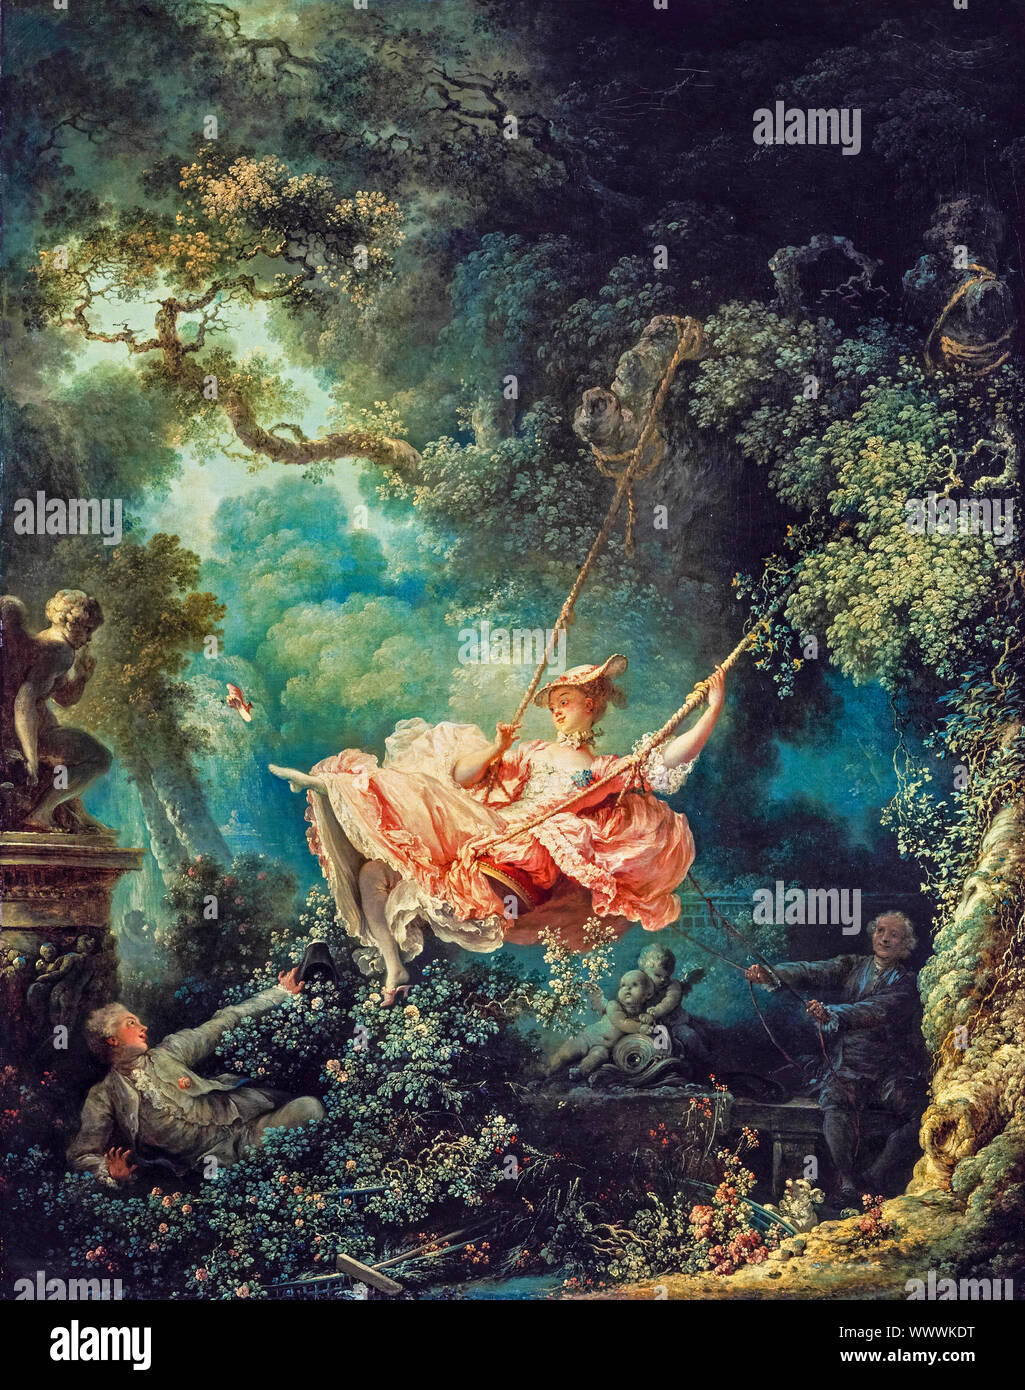 Jean-Honoré Fragonard, The Swing (The Happy Accidents of the Swing), painting, 1767-1768 Stock Photo